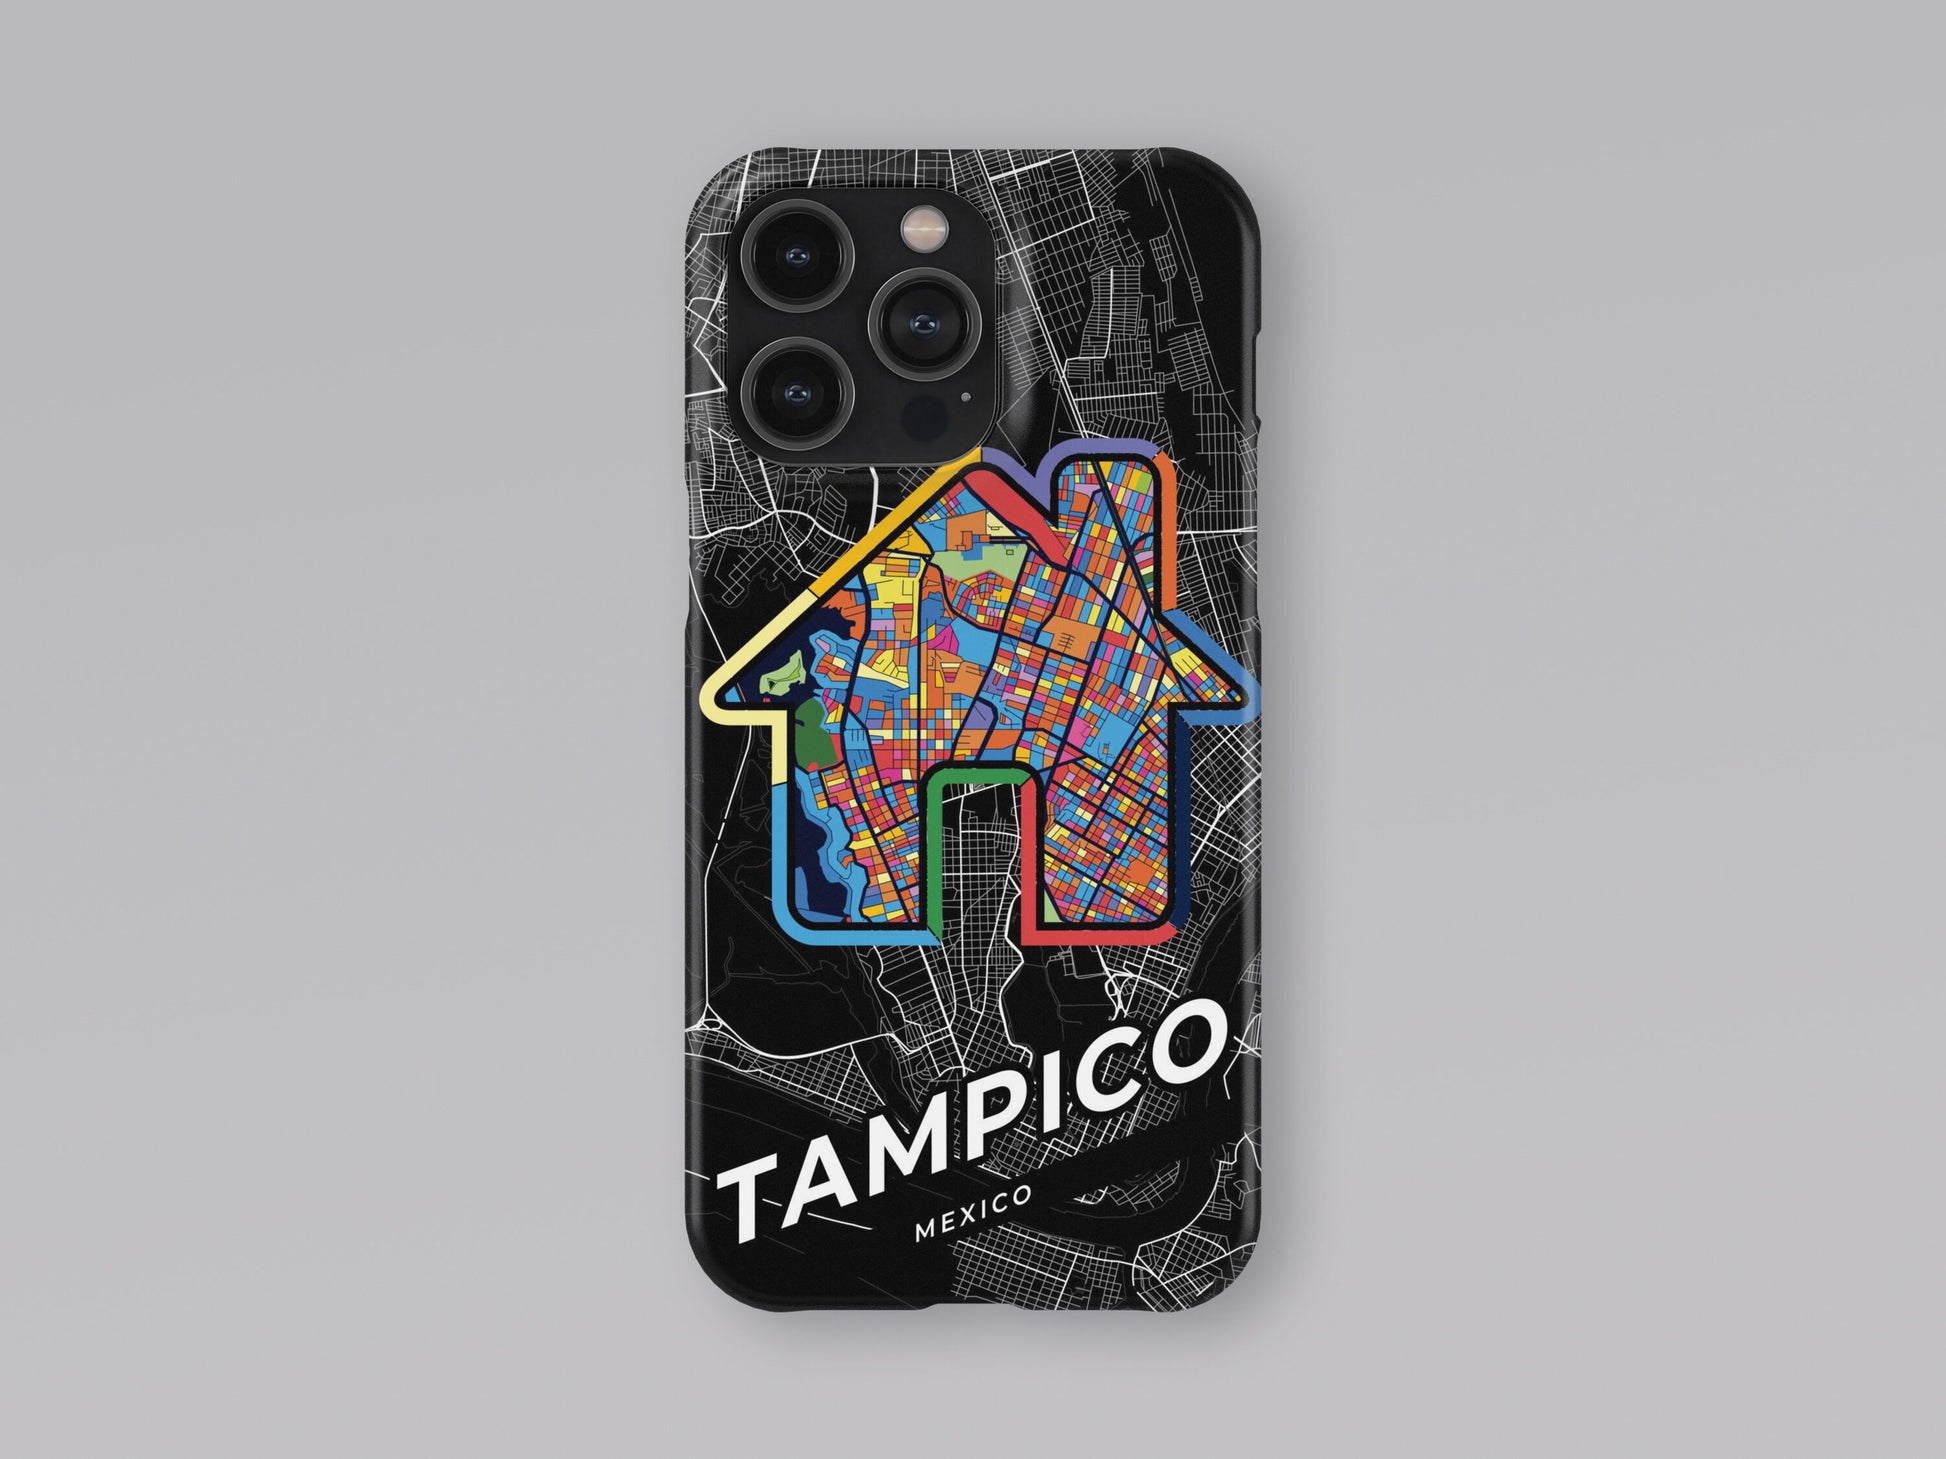 Tampico Mexico slim phone case with colorful icon 3